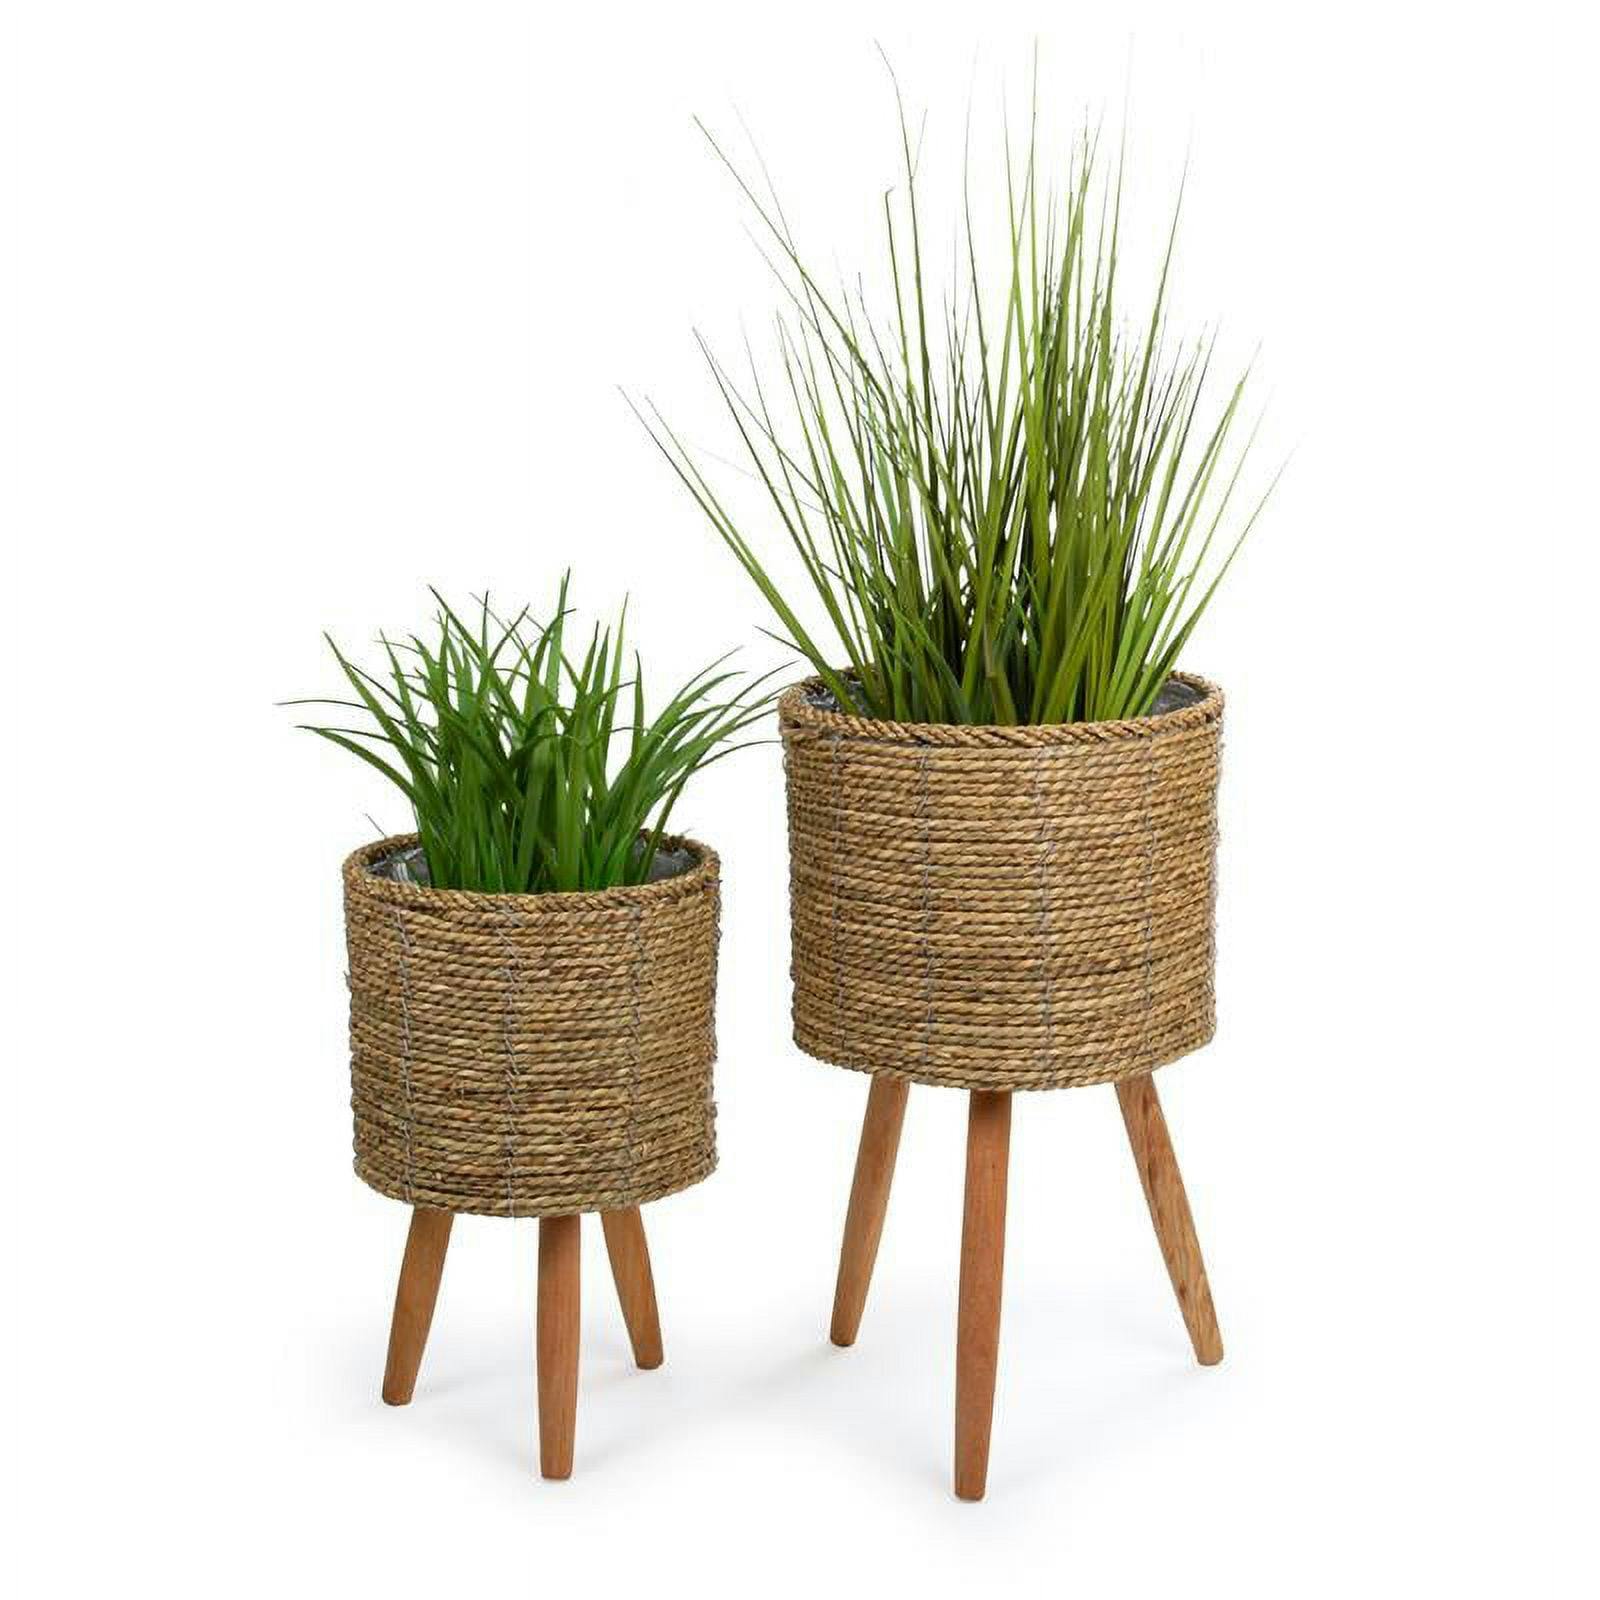 Elevated Harmony 17" Natural Mat Grass Planter with Wooden Legs